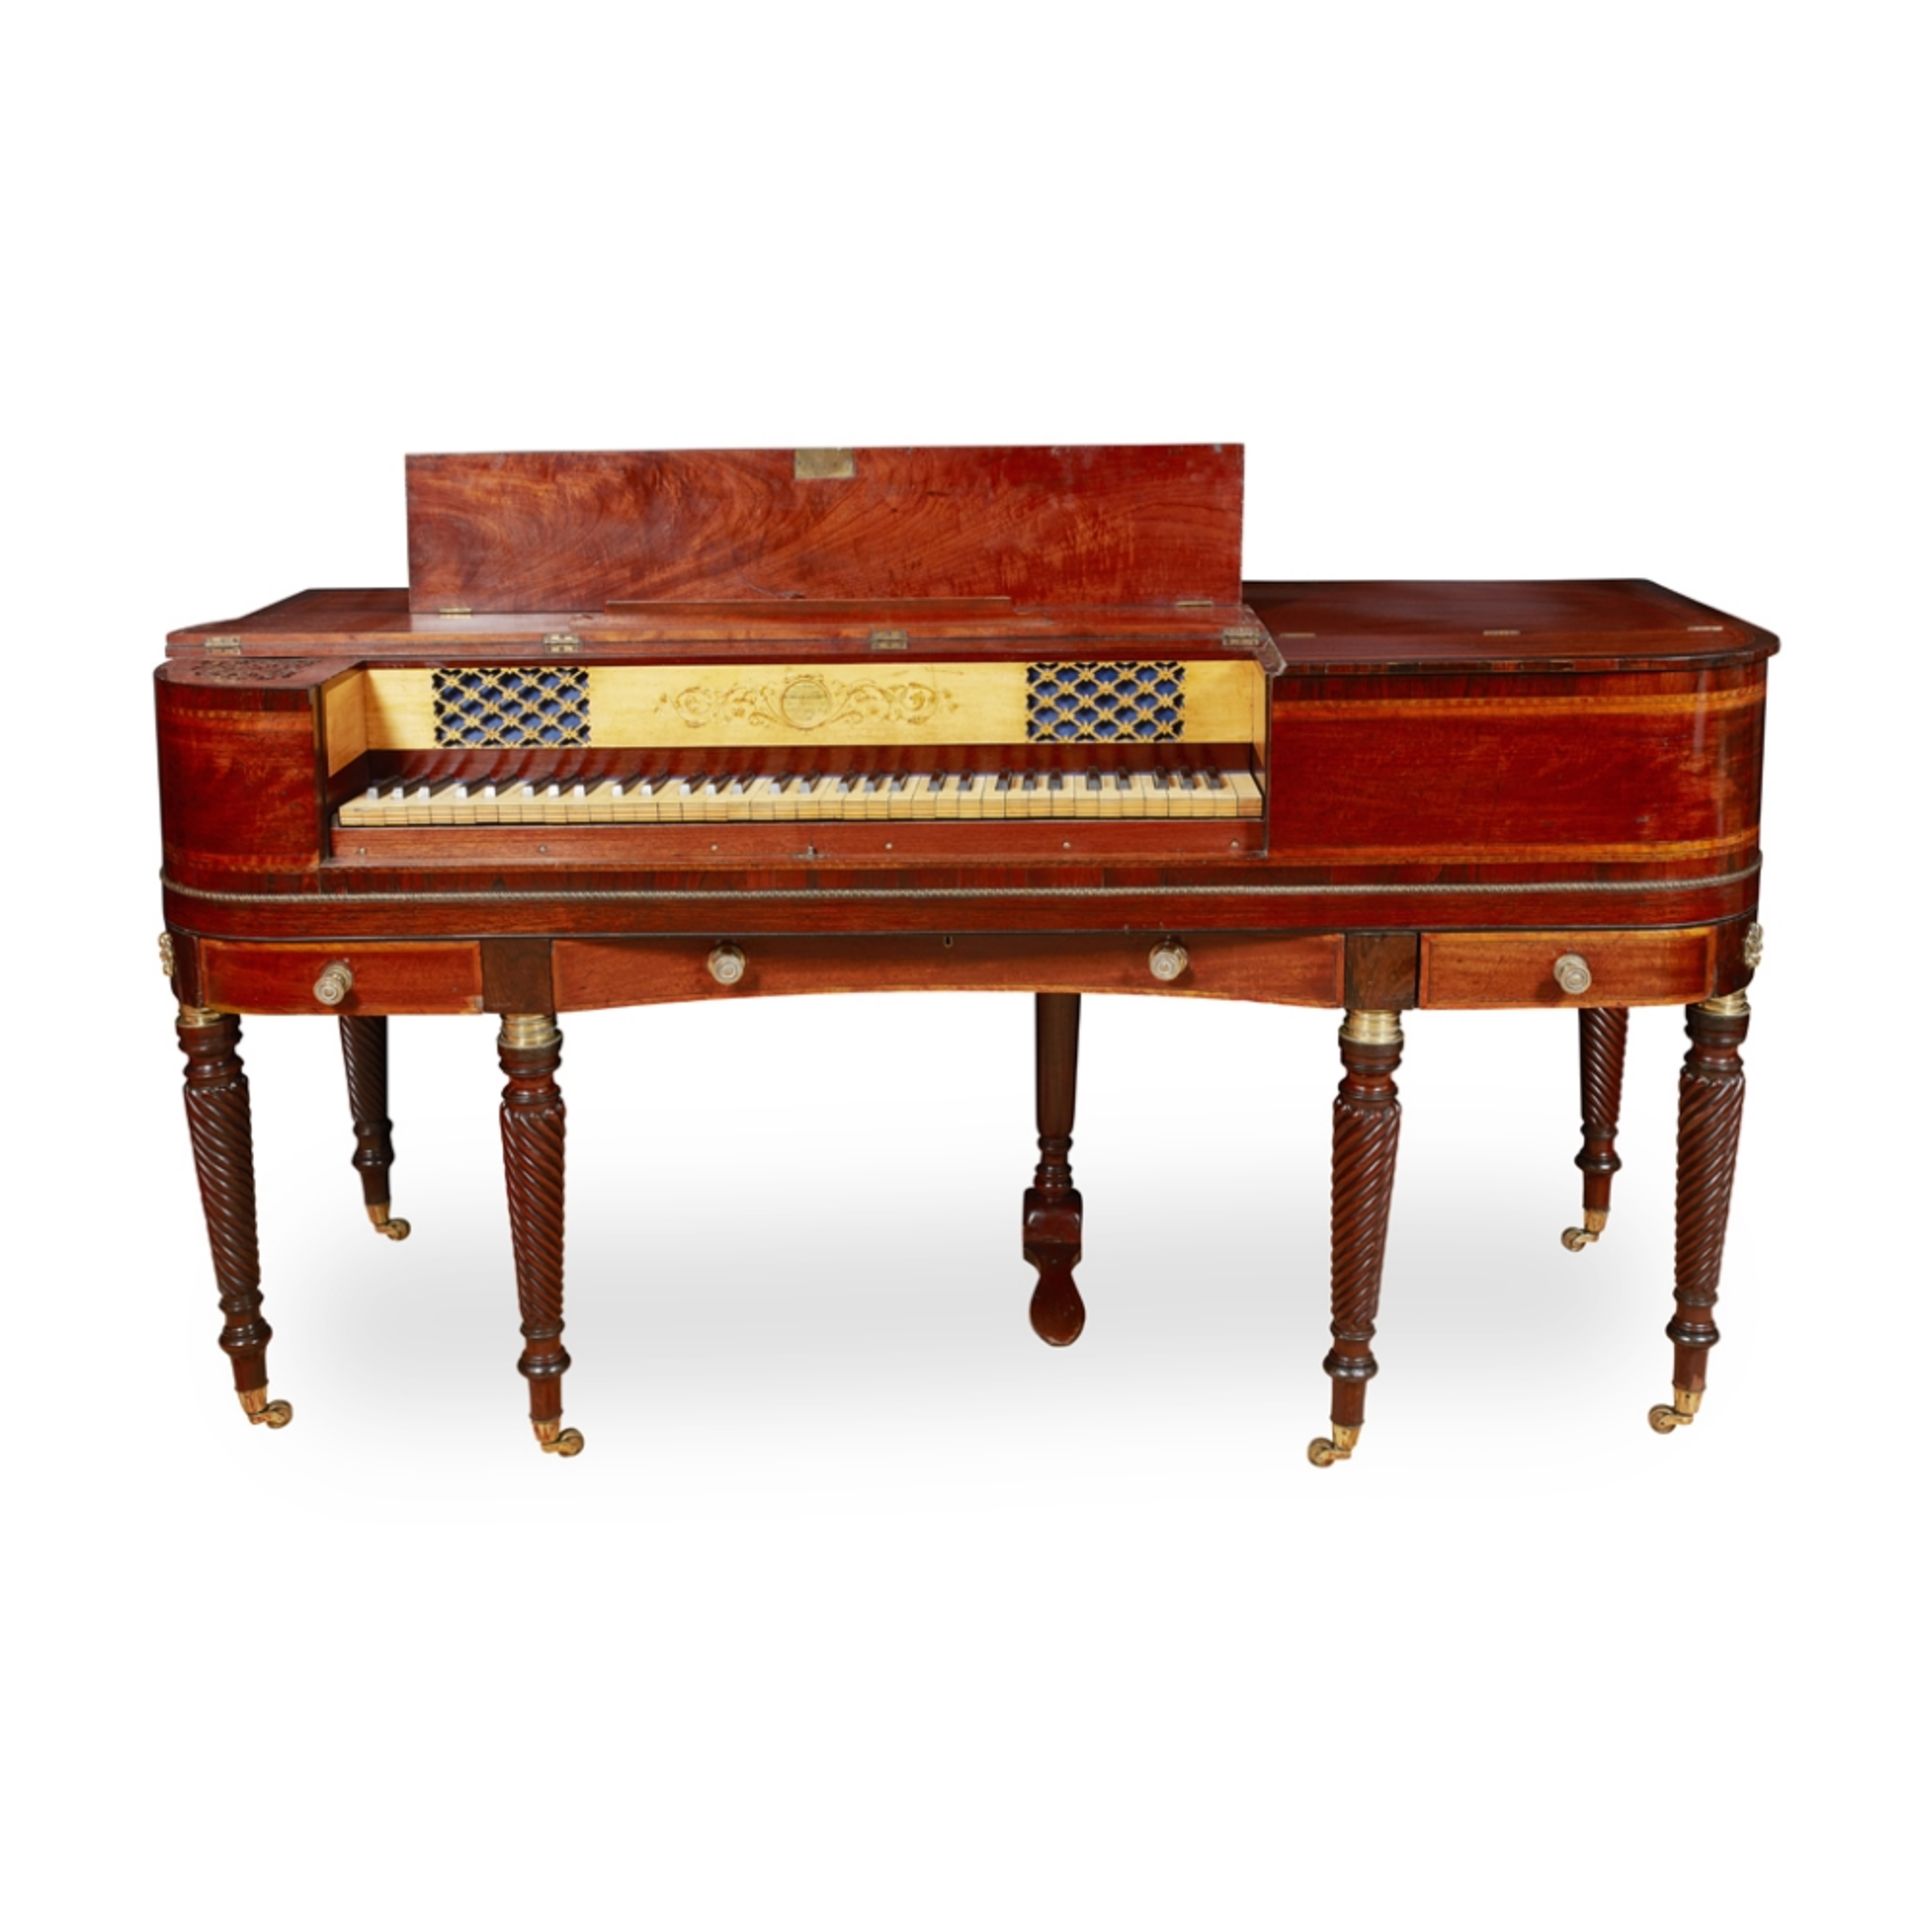 WILLIAM ROLFE & COMPANY, LONDON REGENCY MAHOGANY AND ROSEWOOD SQUARE PIANO, EARLY 19TH CENTURY the